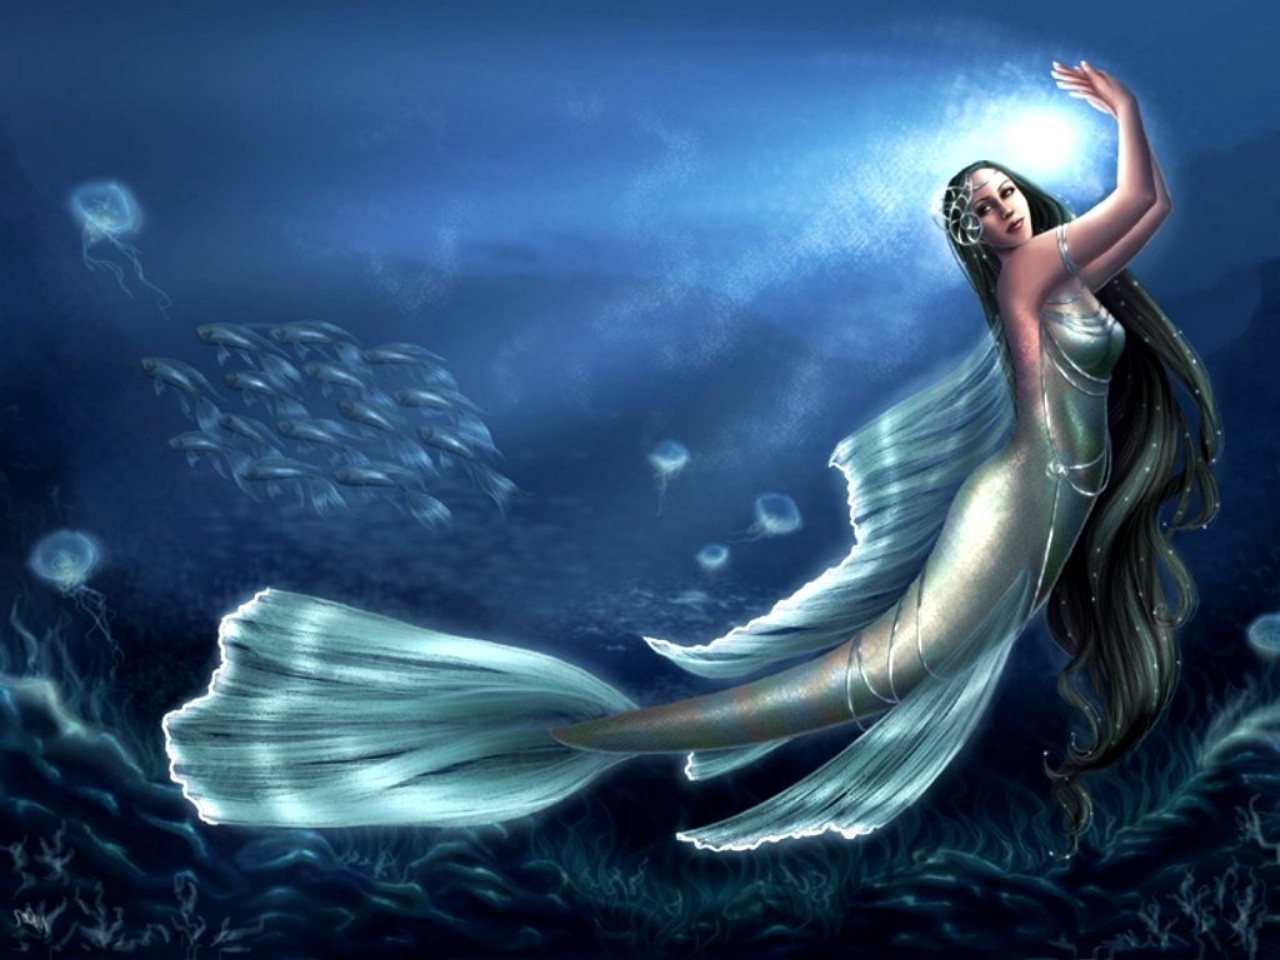 Download 1280x960 Fantasy Mermaid Wallpapers and Backgrounds